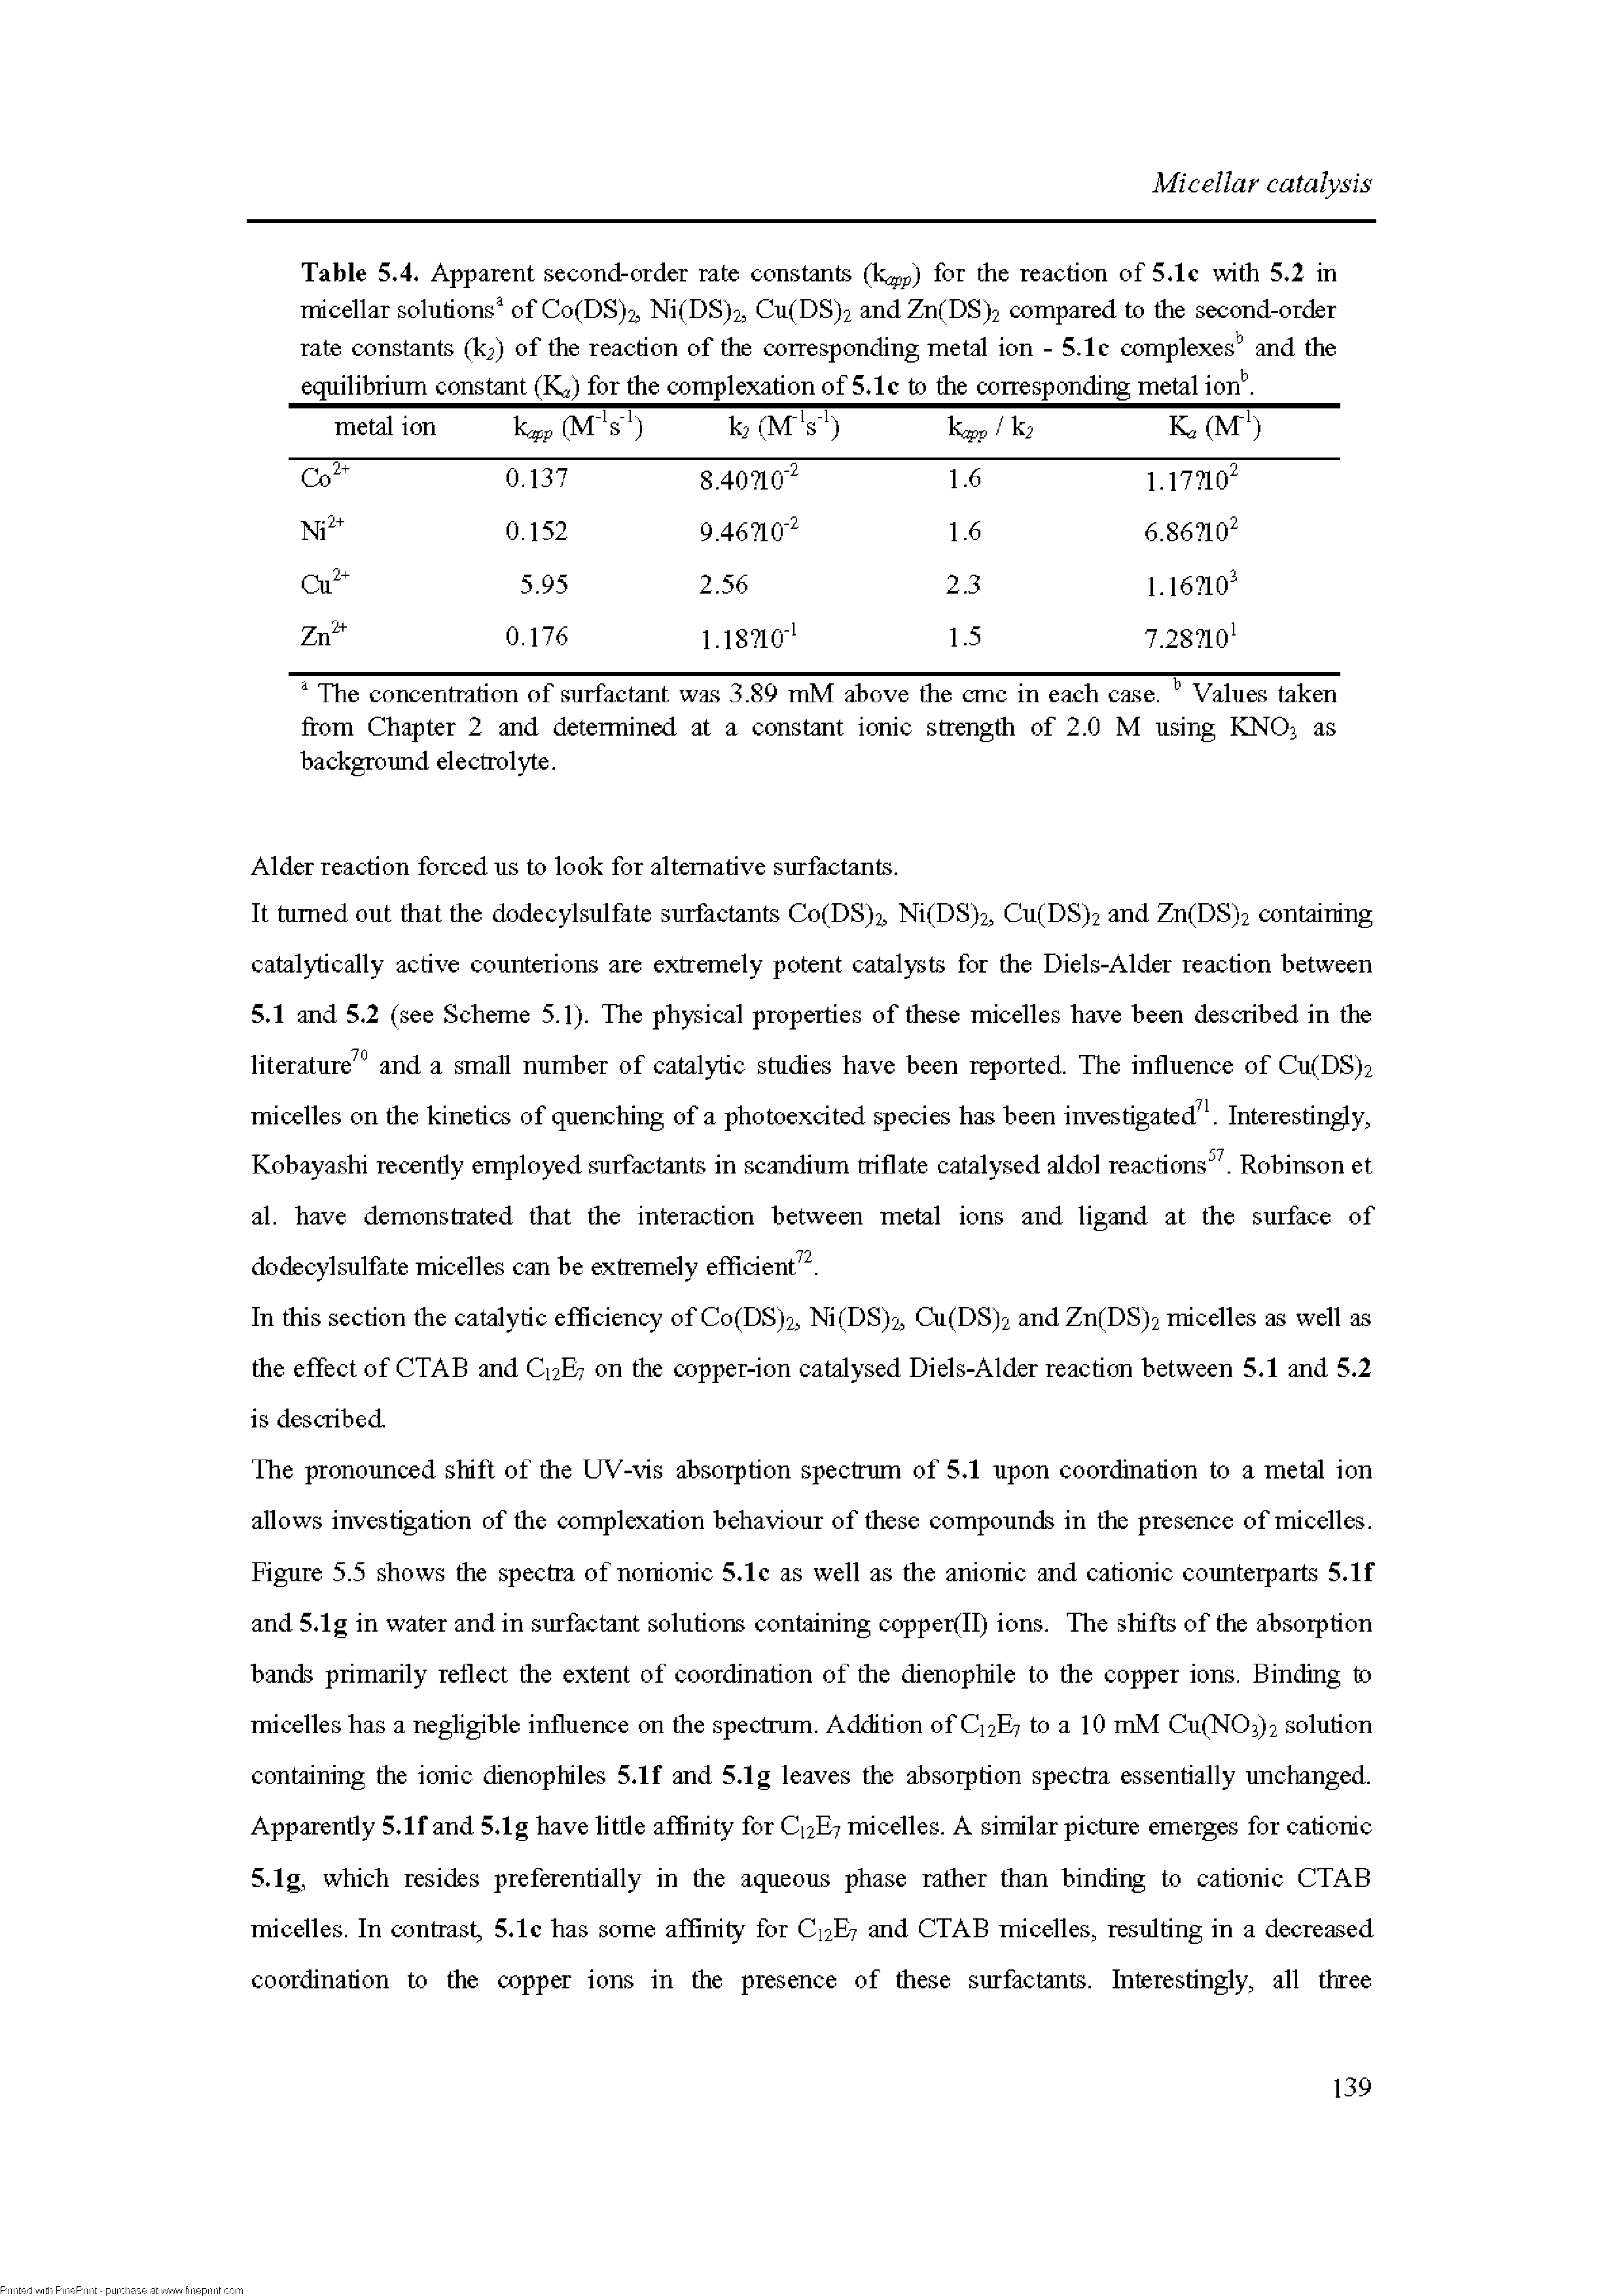 Table 5.4. Apparent second-order rate constants (ycjfp) for the reaction of 5.1c with 5.2 in micellar solutions of Co(DS)2, Ni(DS)2, Cu(DS)2 and Zn(DS)2 compared to the second-order...